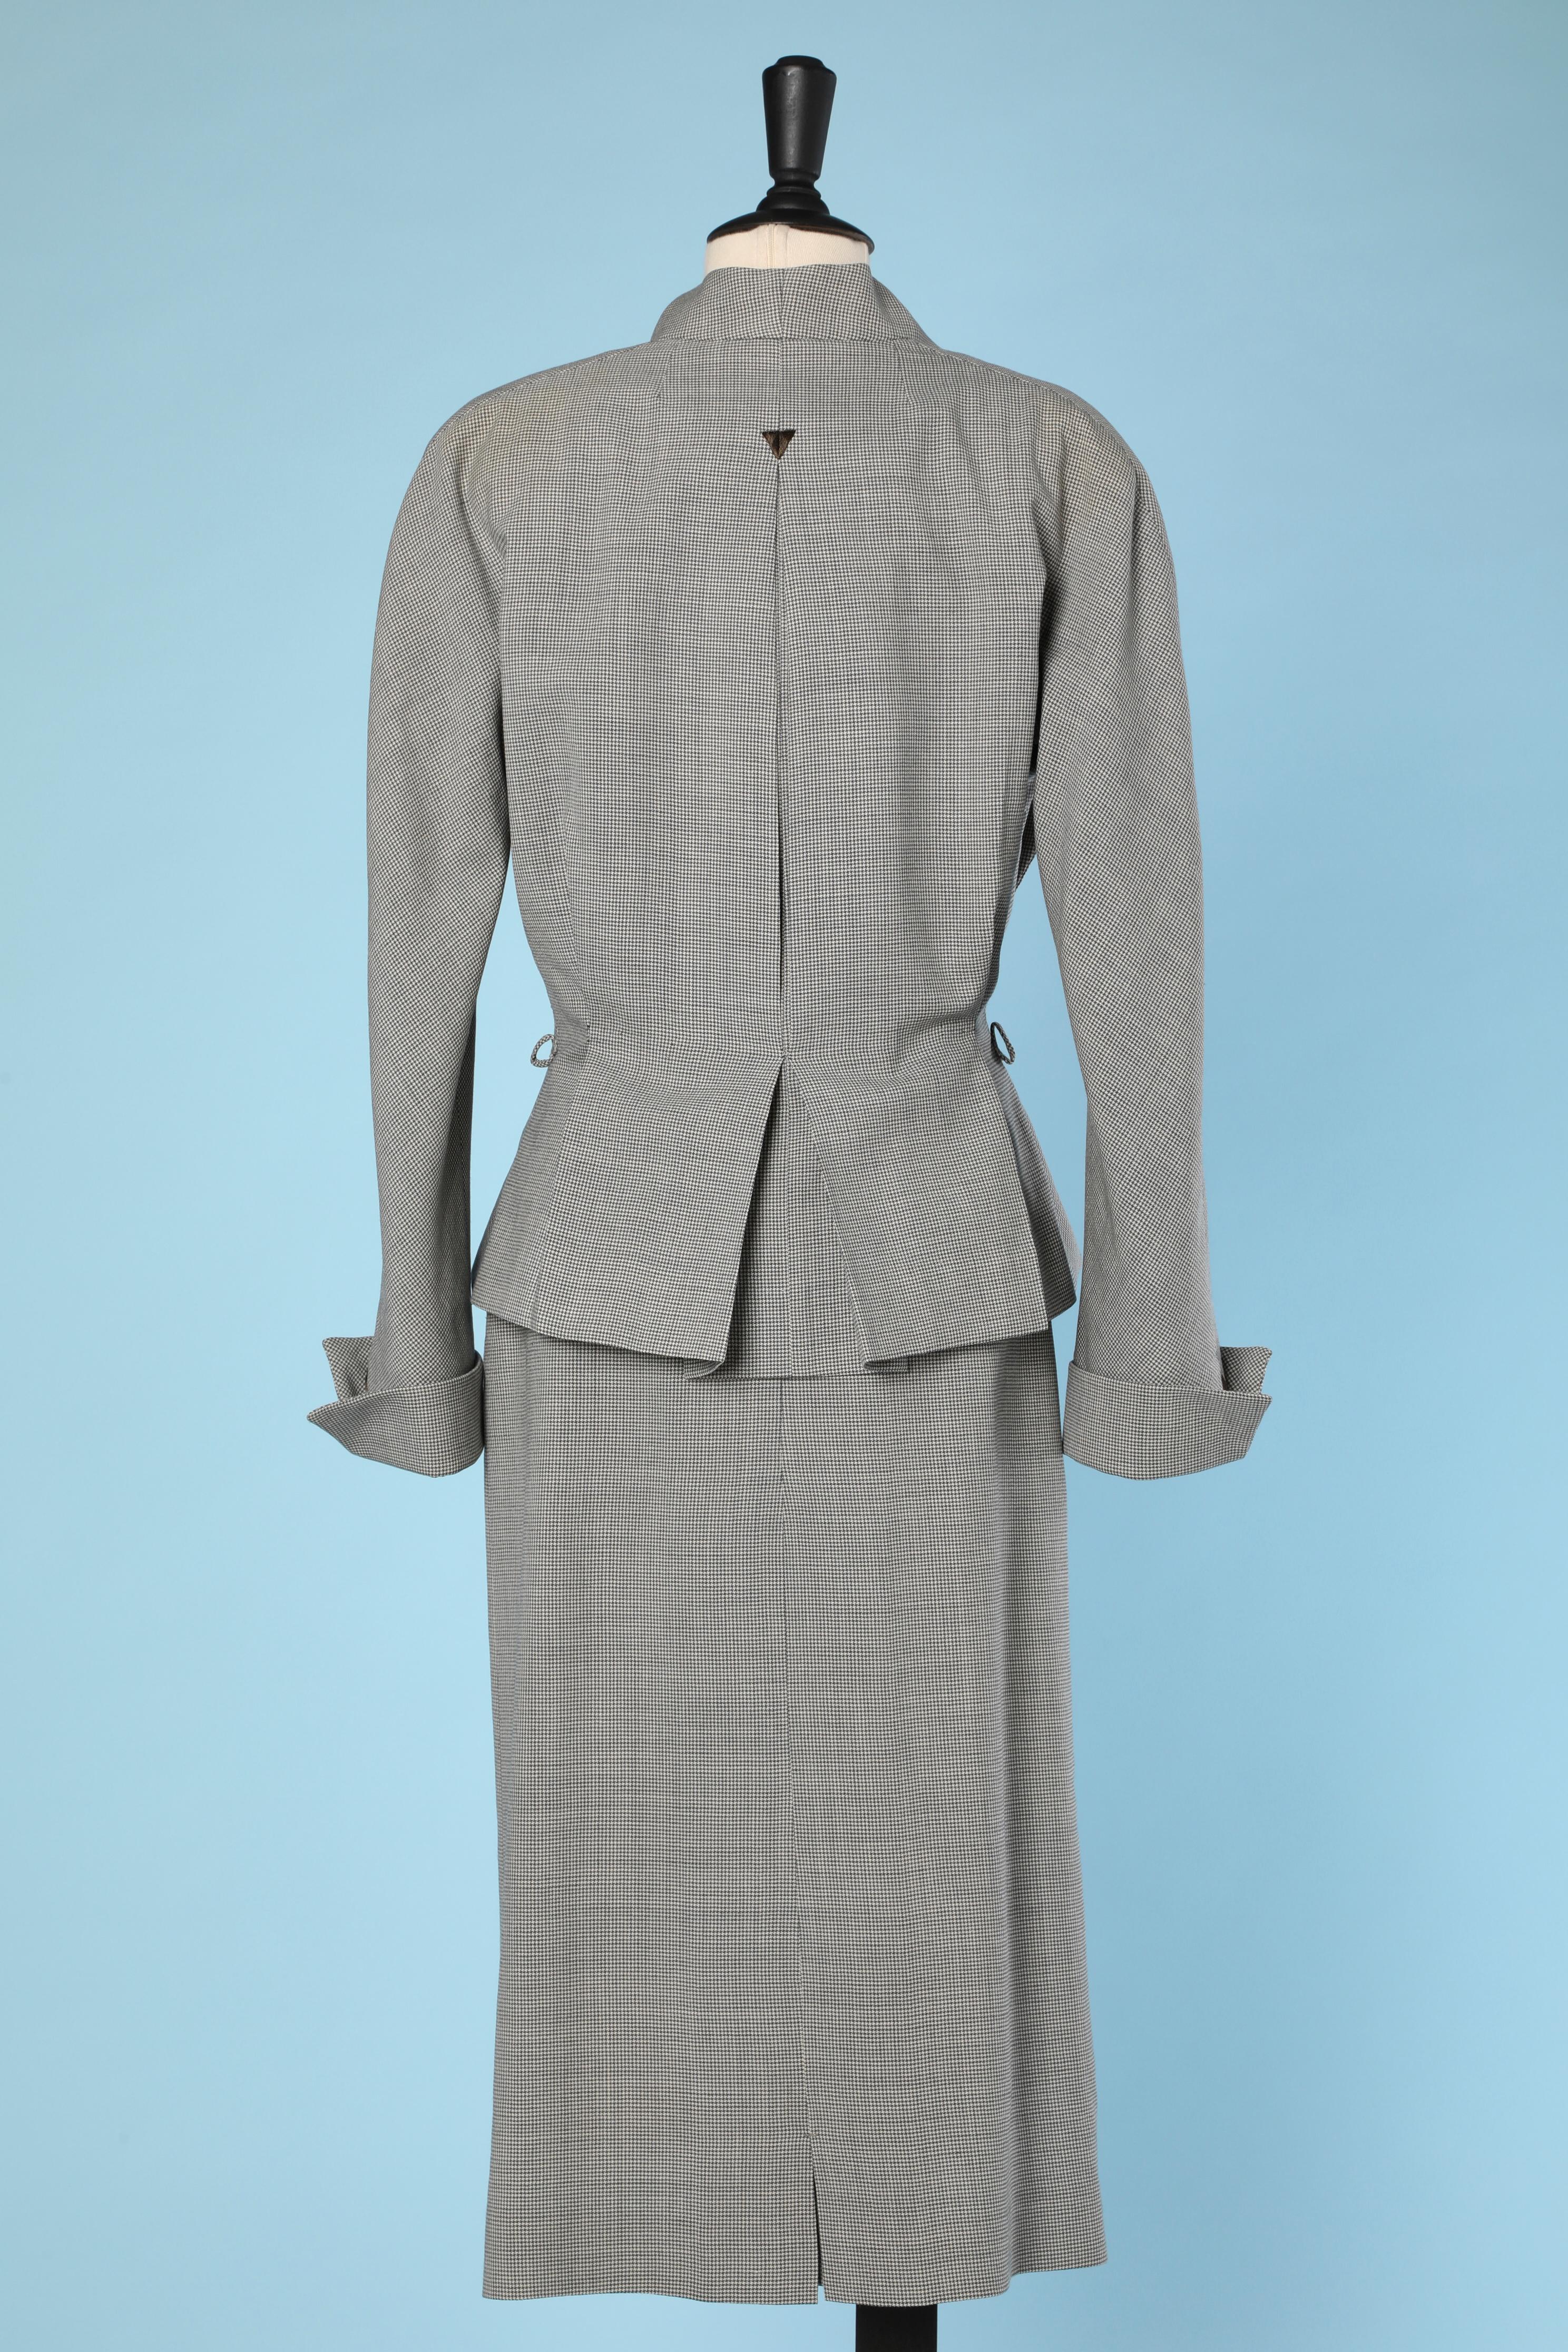 Women's 1950's skirt-suit in mini houndstooth pattern Jacques Fath 